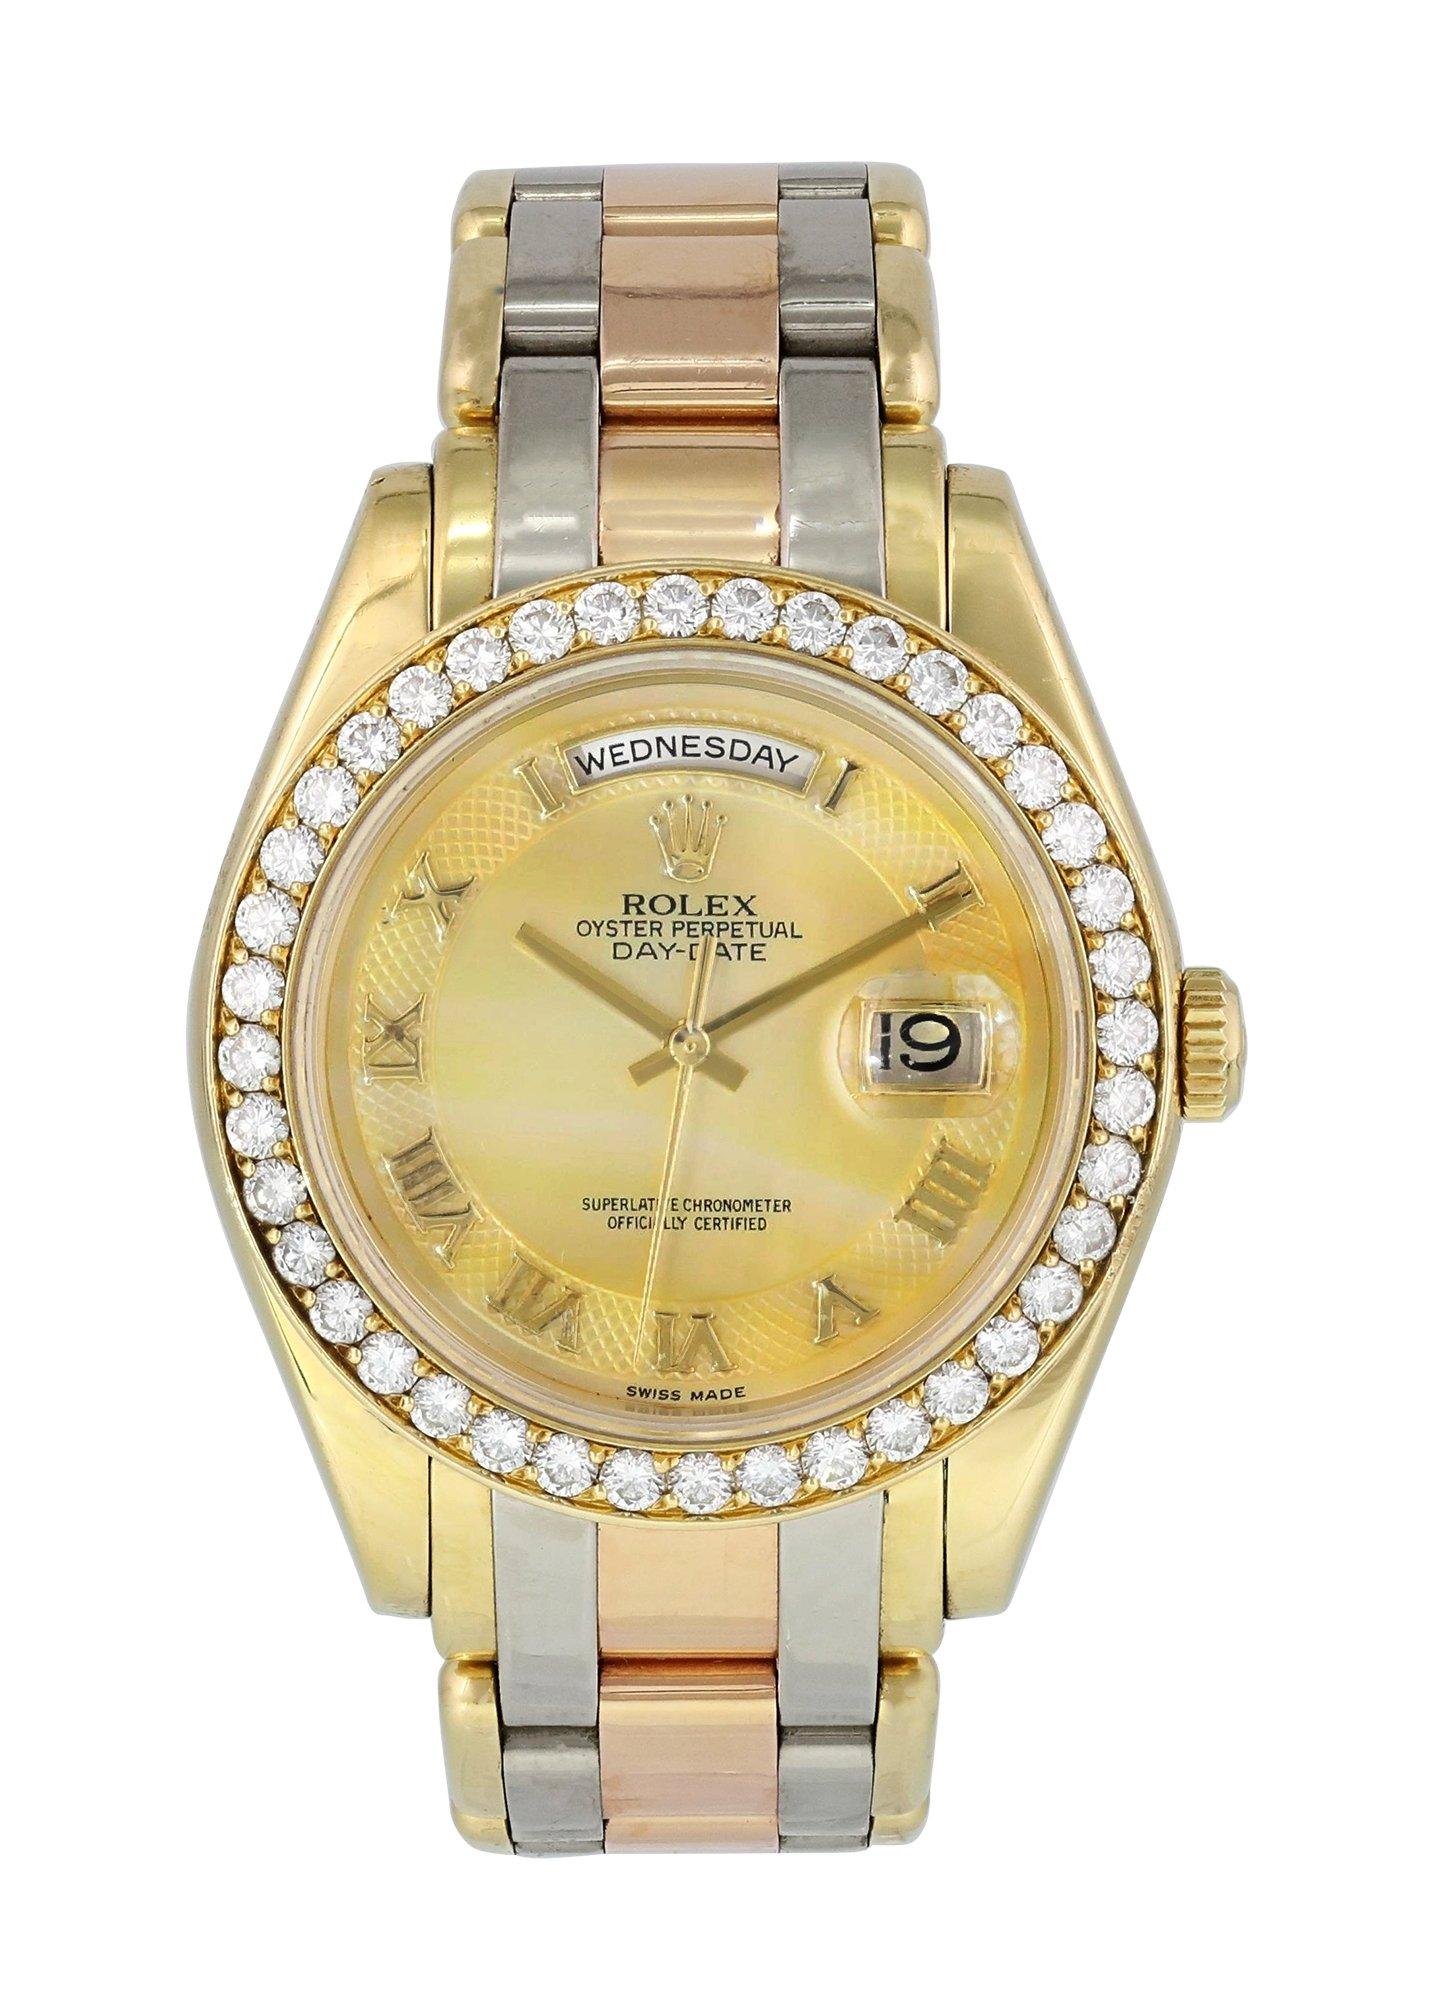 Rolex Tridor Day Date Perlmaster 18948  Mens Watch.
39mm 18k Yellow Gold case. 
Yellow Gold Stationary bezel with factory set diamonds. 
Mother-of-Pearl dial with gold hands and Roman numeral hour markers. 
Minute markers on the outer dial. 
Date